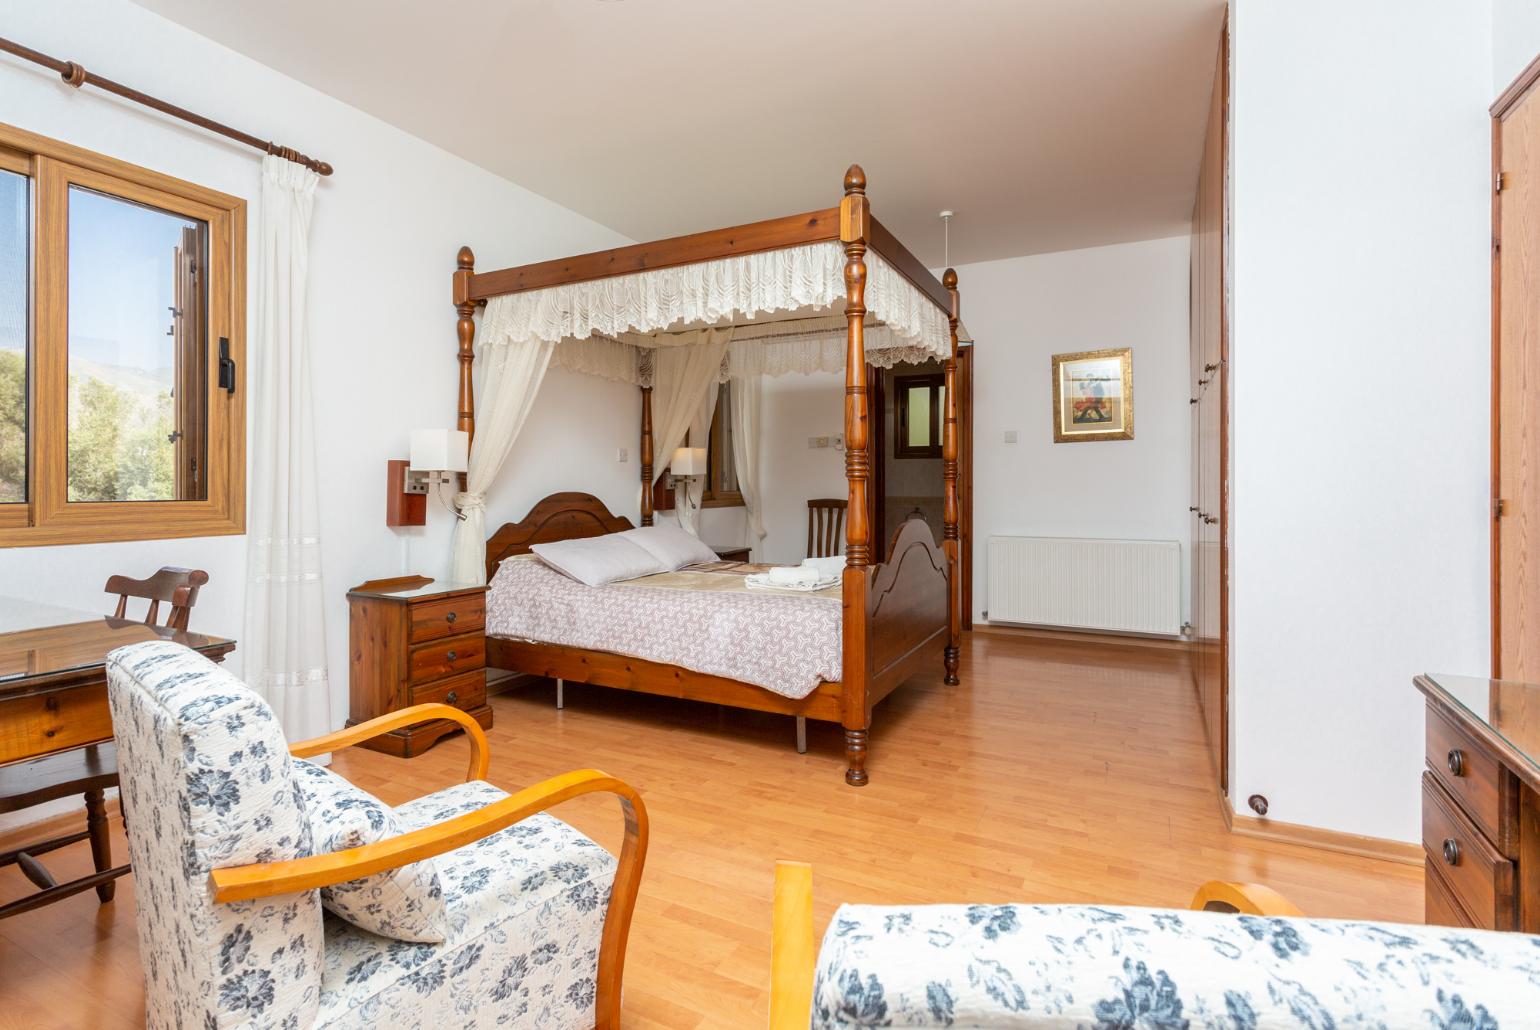 Double bedroom with en suite bathroom, A/C, seating, and balcony access with sea views